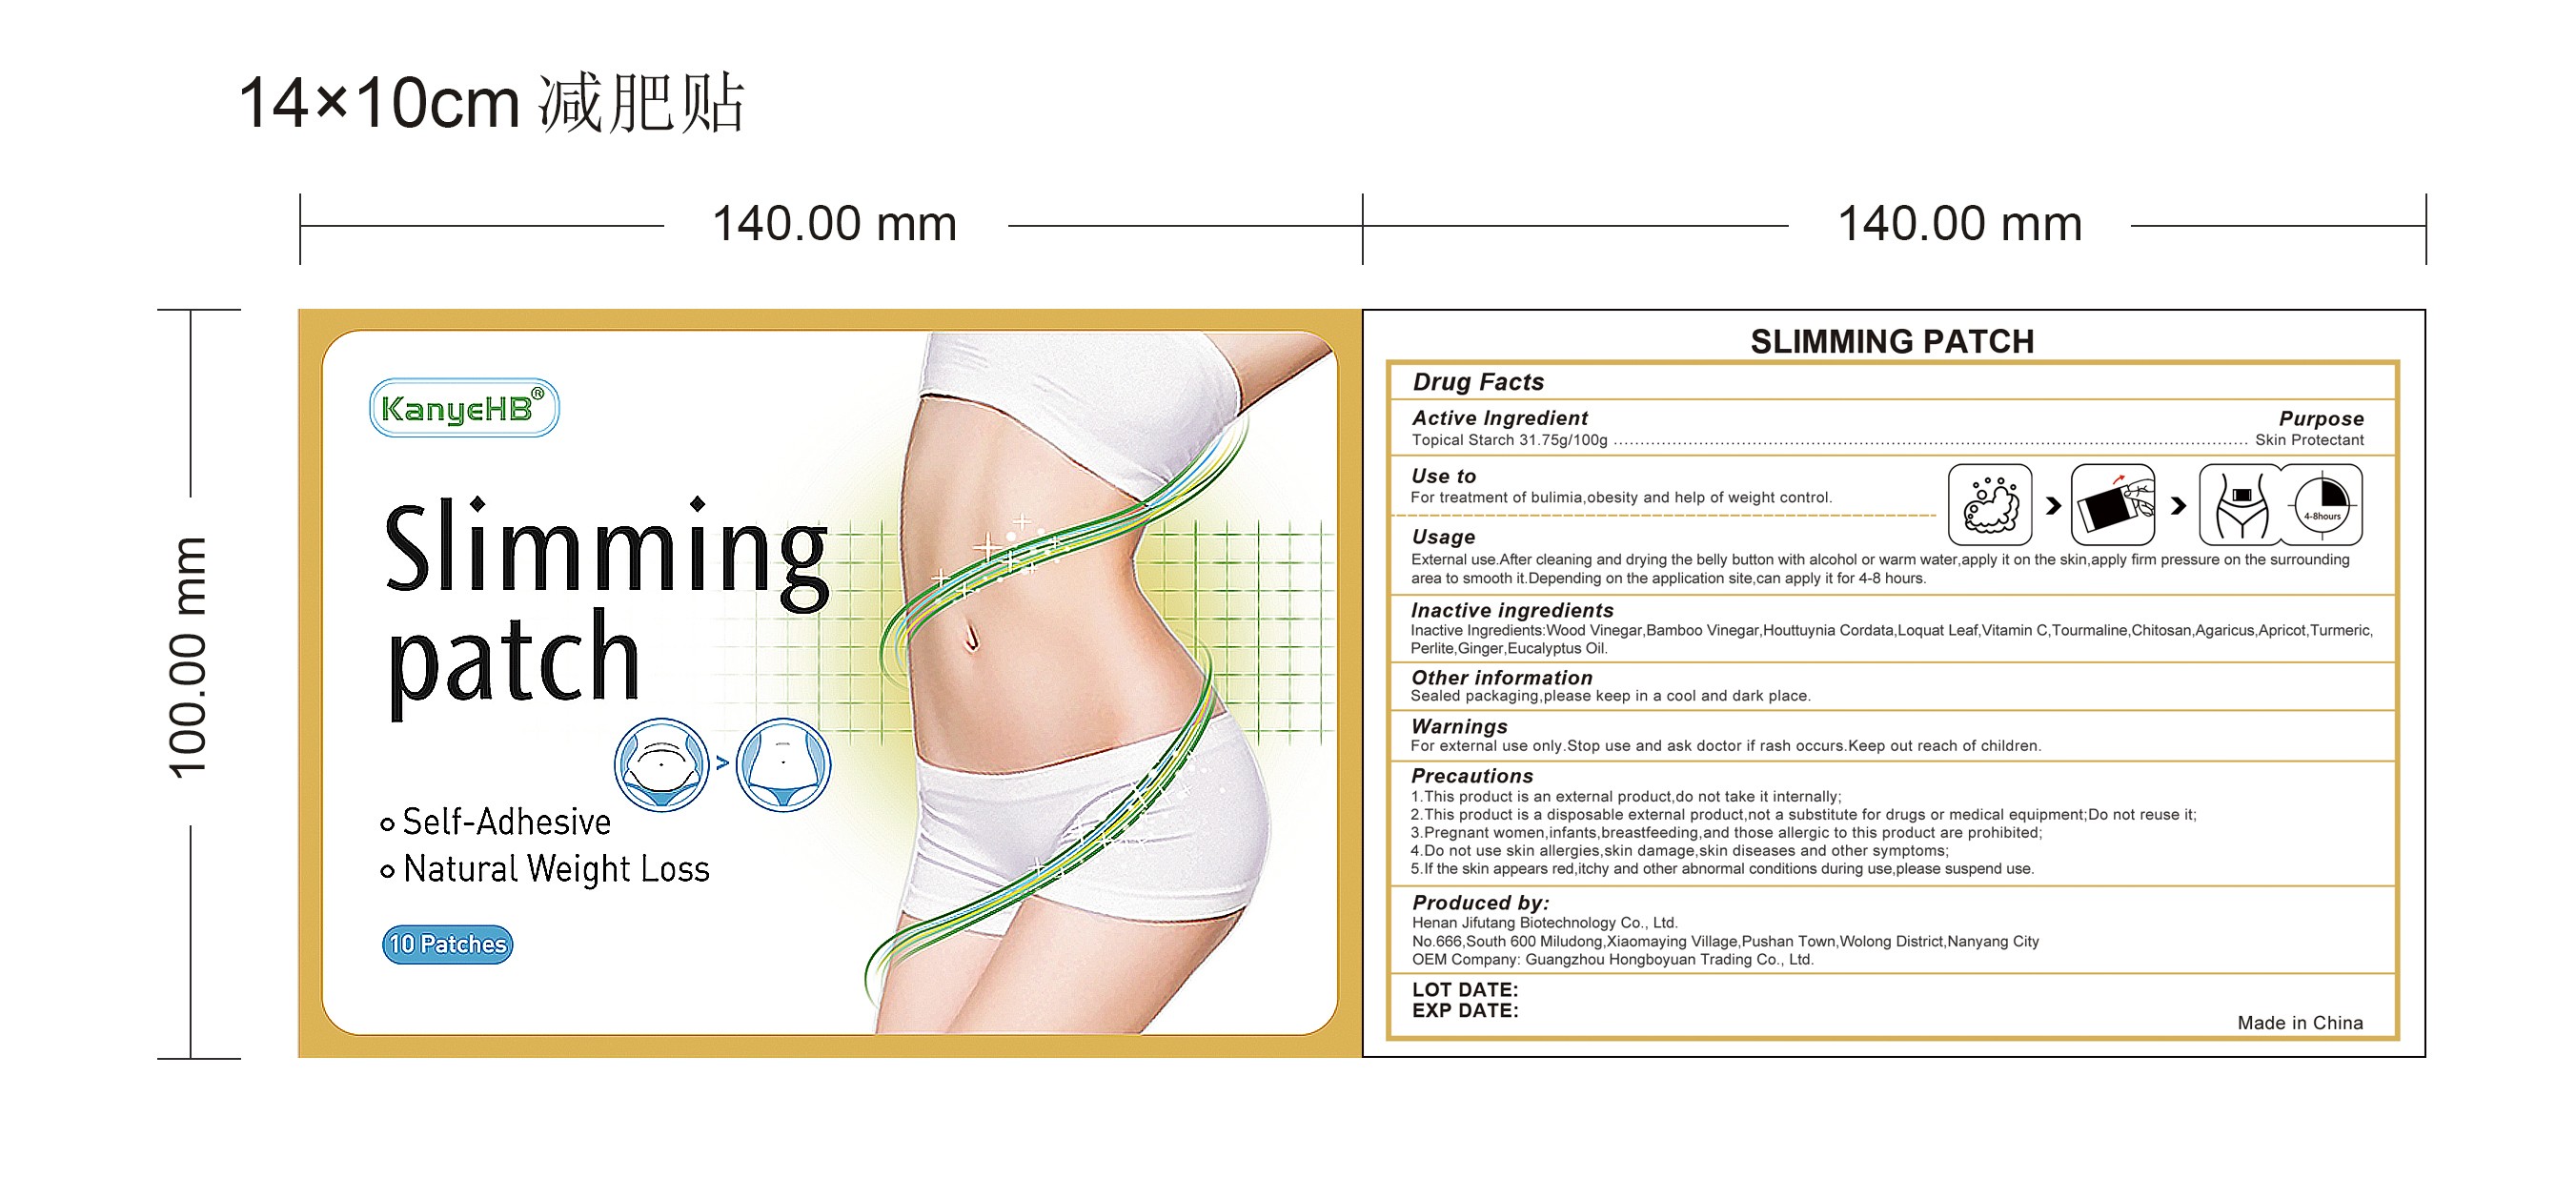 Slimming Patch